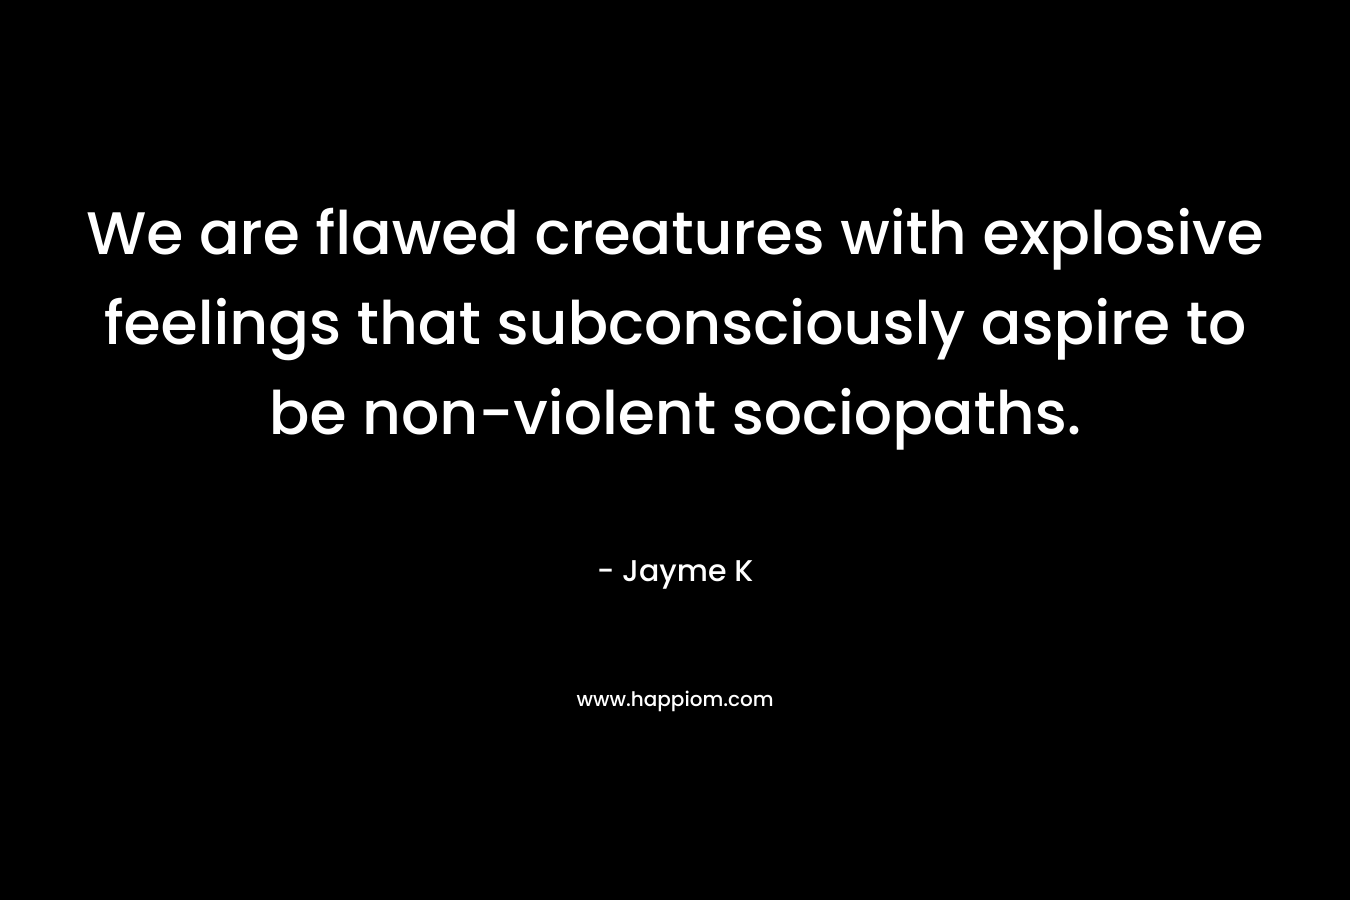 We are flawed creatures with explosive feelings that subconsciously aspire to be non-violent sociopaths.